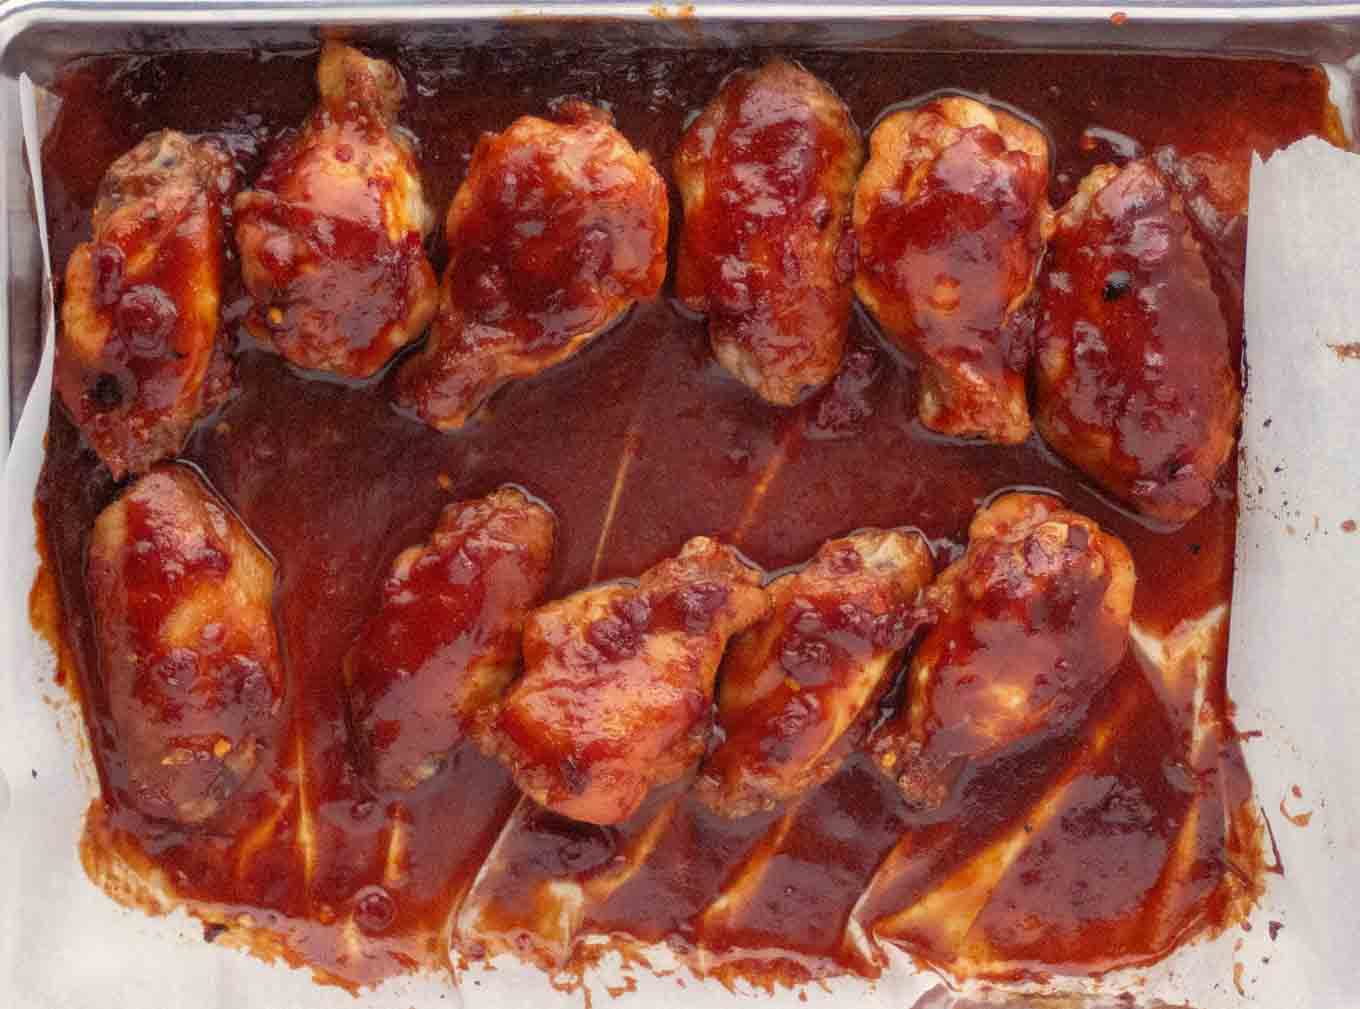 wings with additional marinade brushed on them on the baking sheet